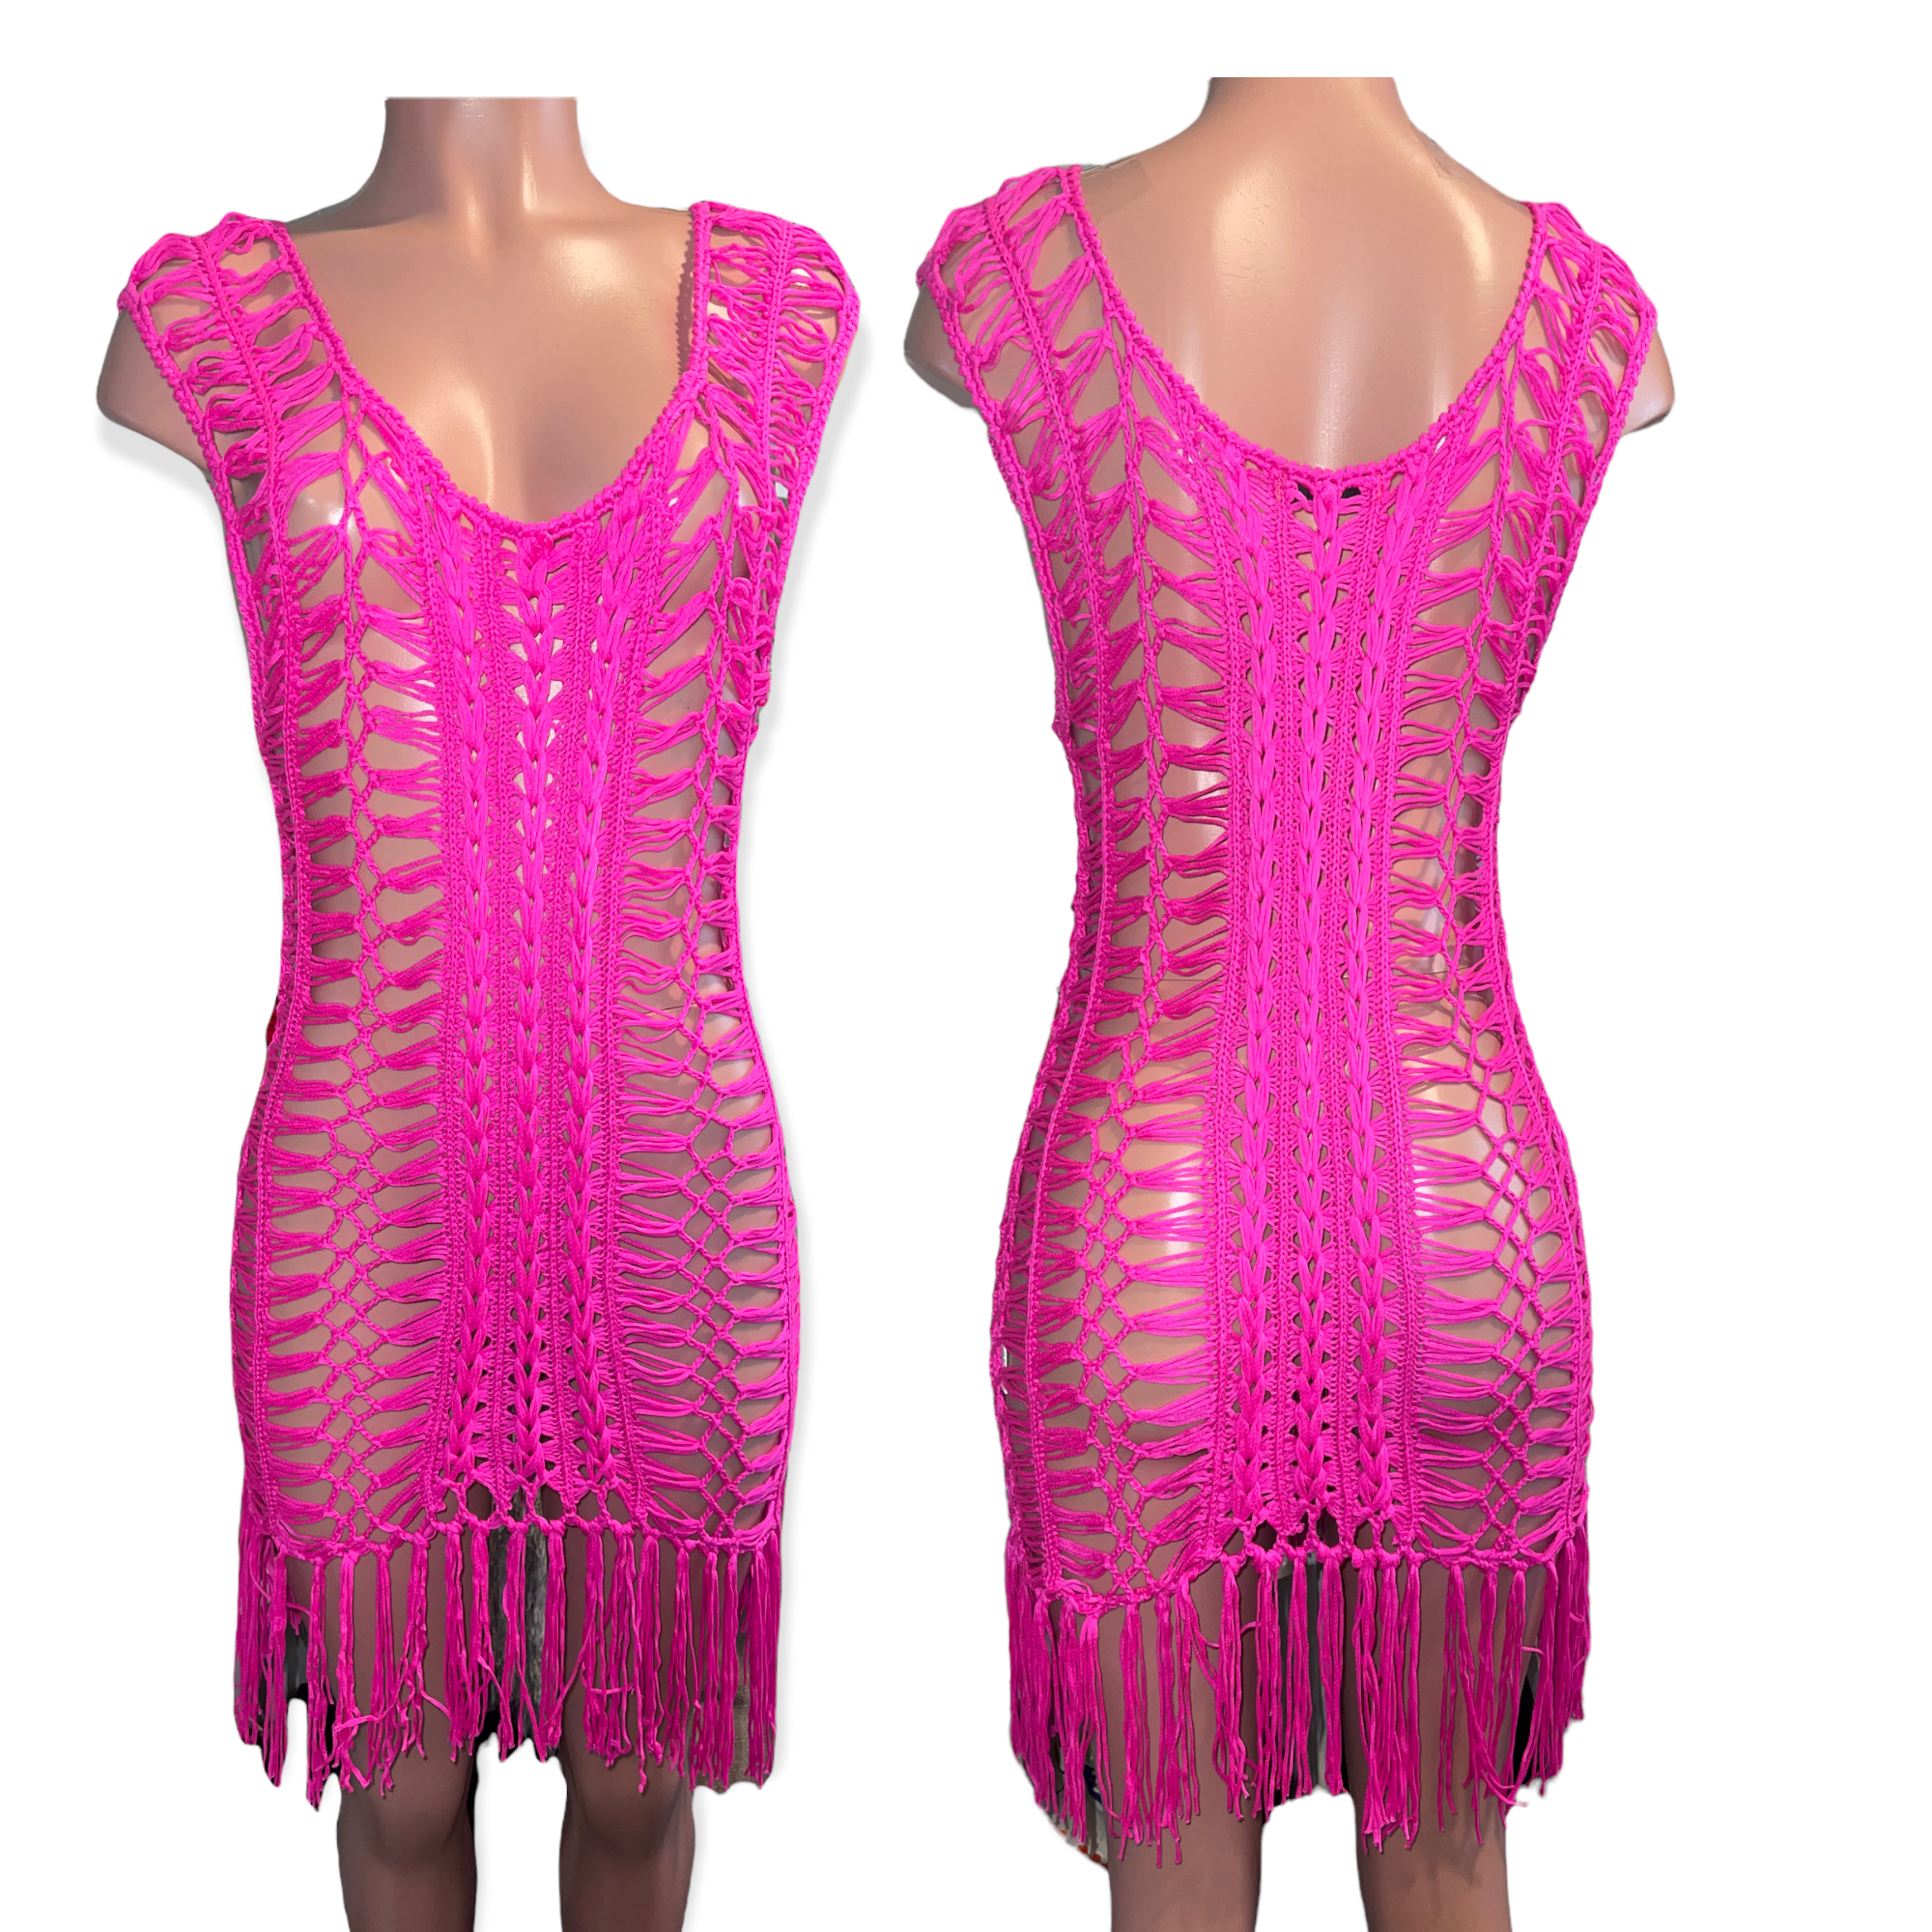 PINK-A-LICIOUS COVERUP DRESS